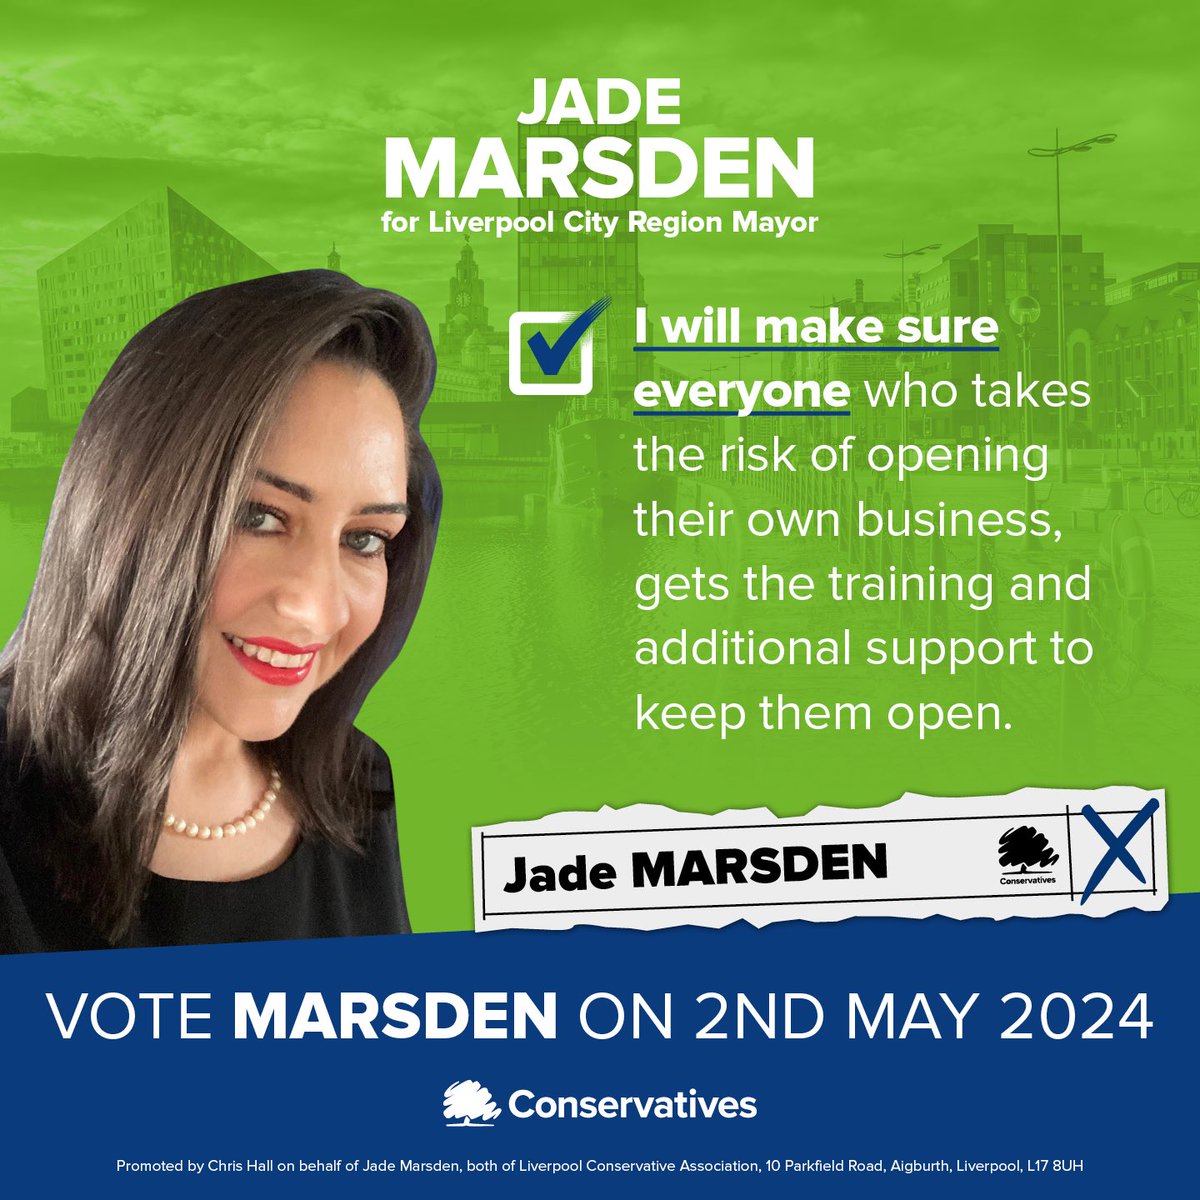 #VoteMarsden to support your local businesses!